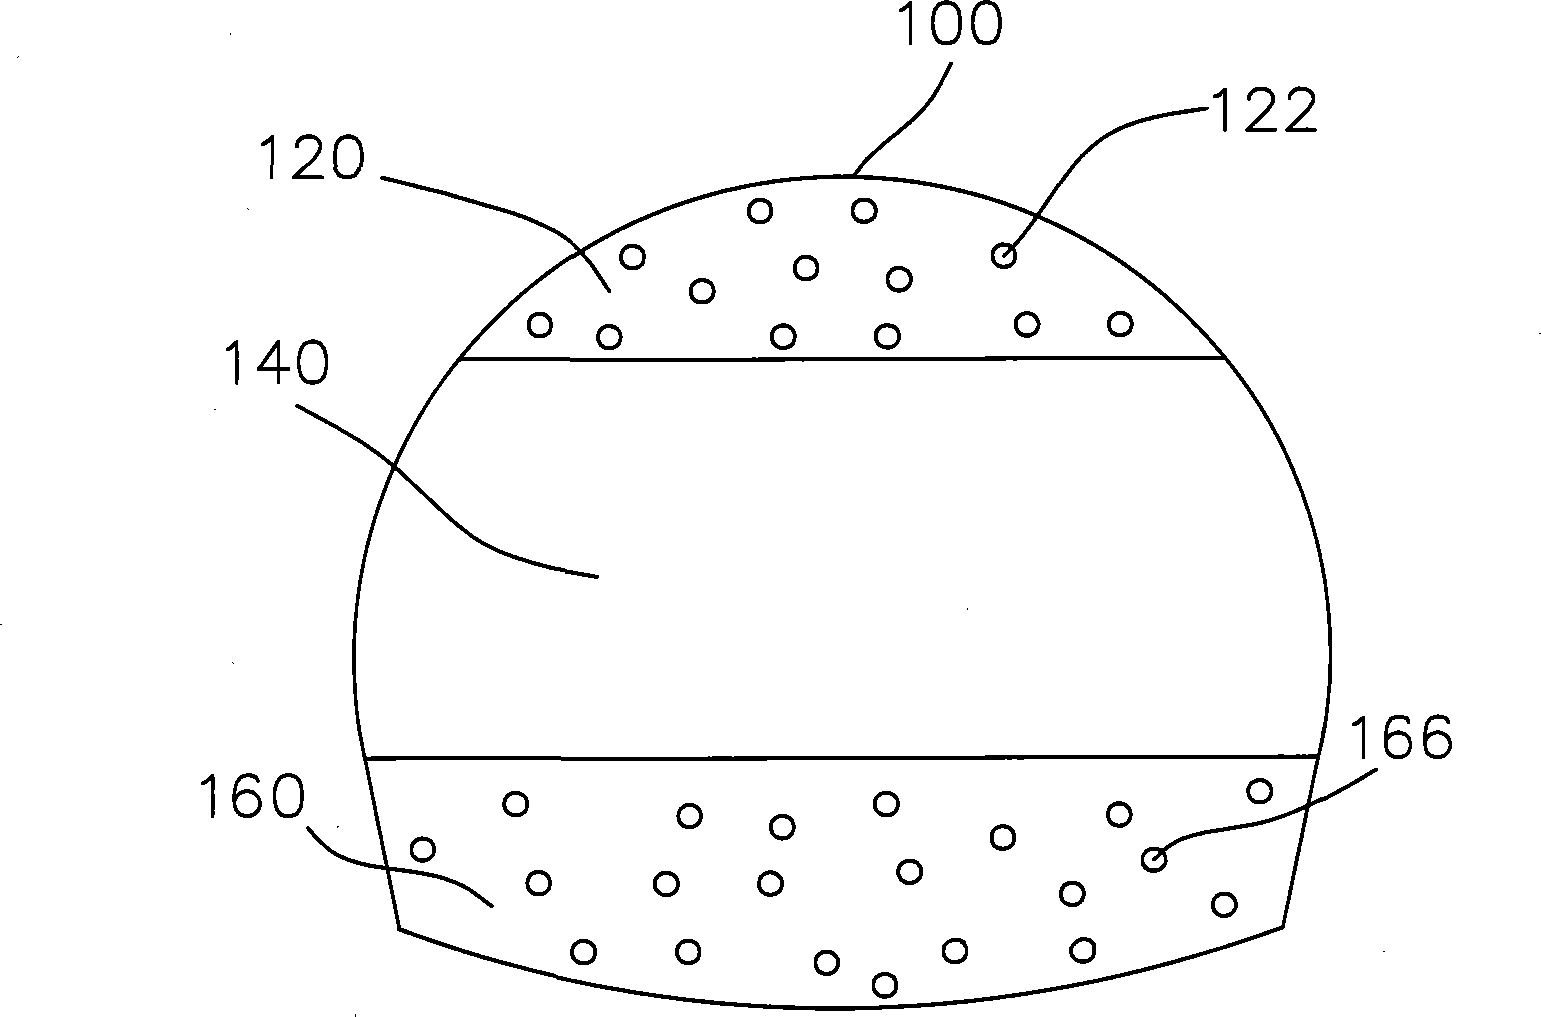 Mechanical mode and control blasting combined tunneling method